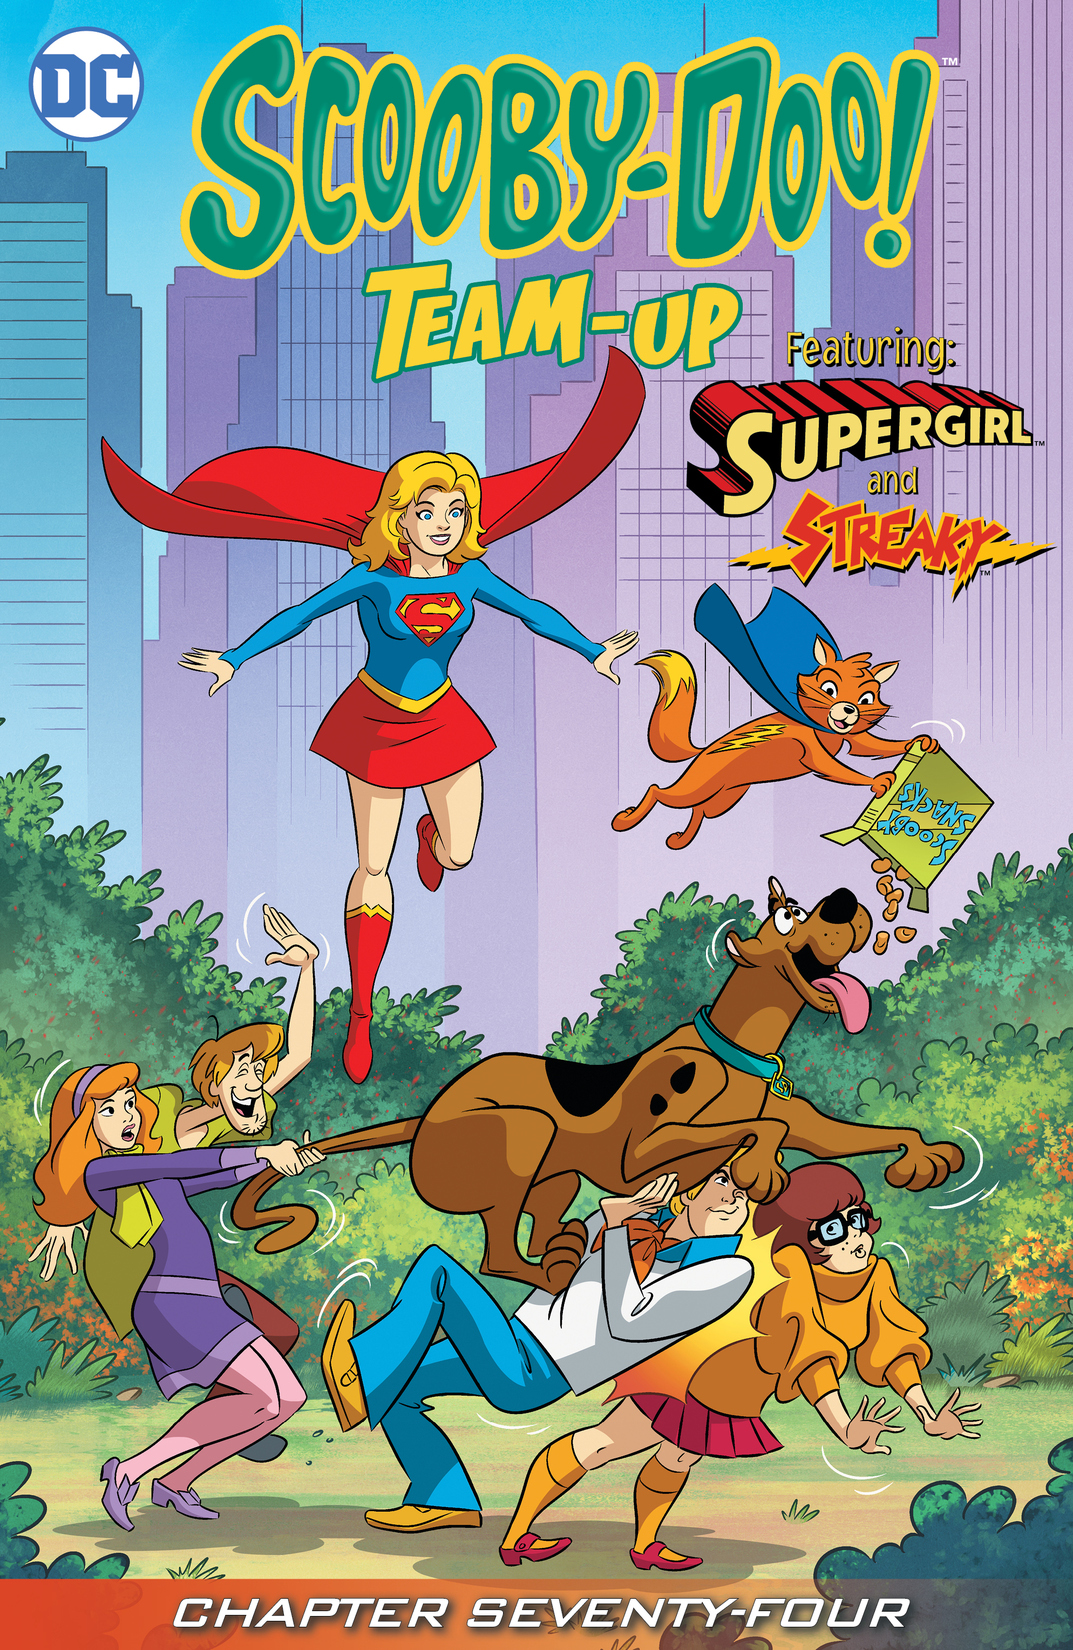 Scooby-Doo Team-Up #74 preview images